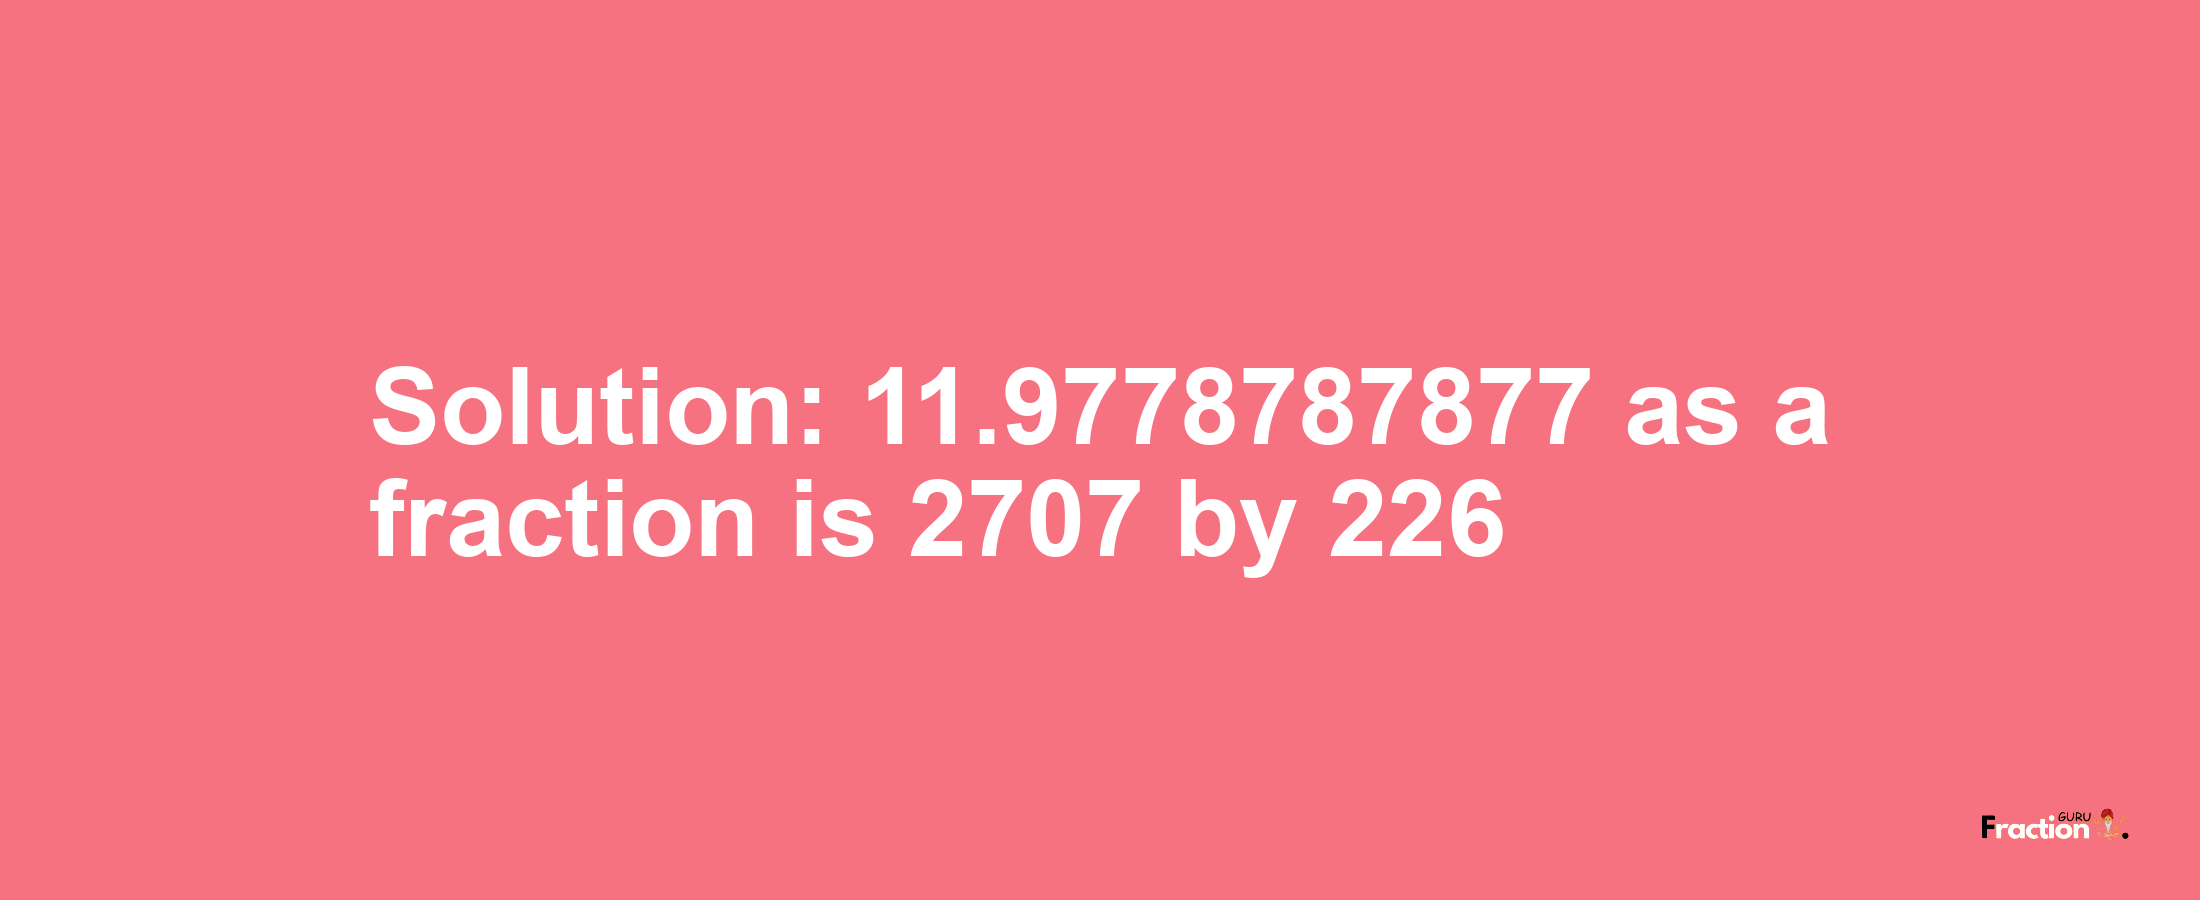 Solution:11.9778787877 as a fraction is 2707/226